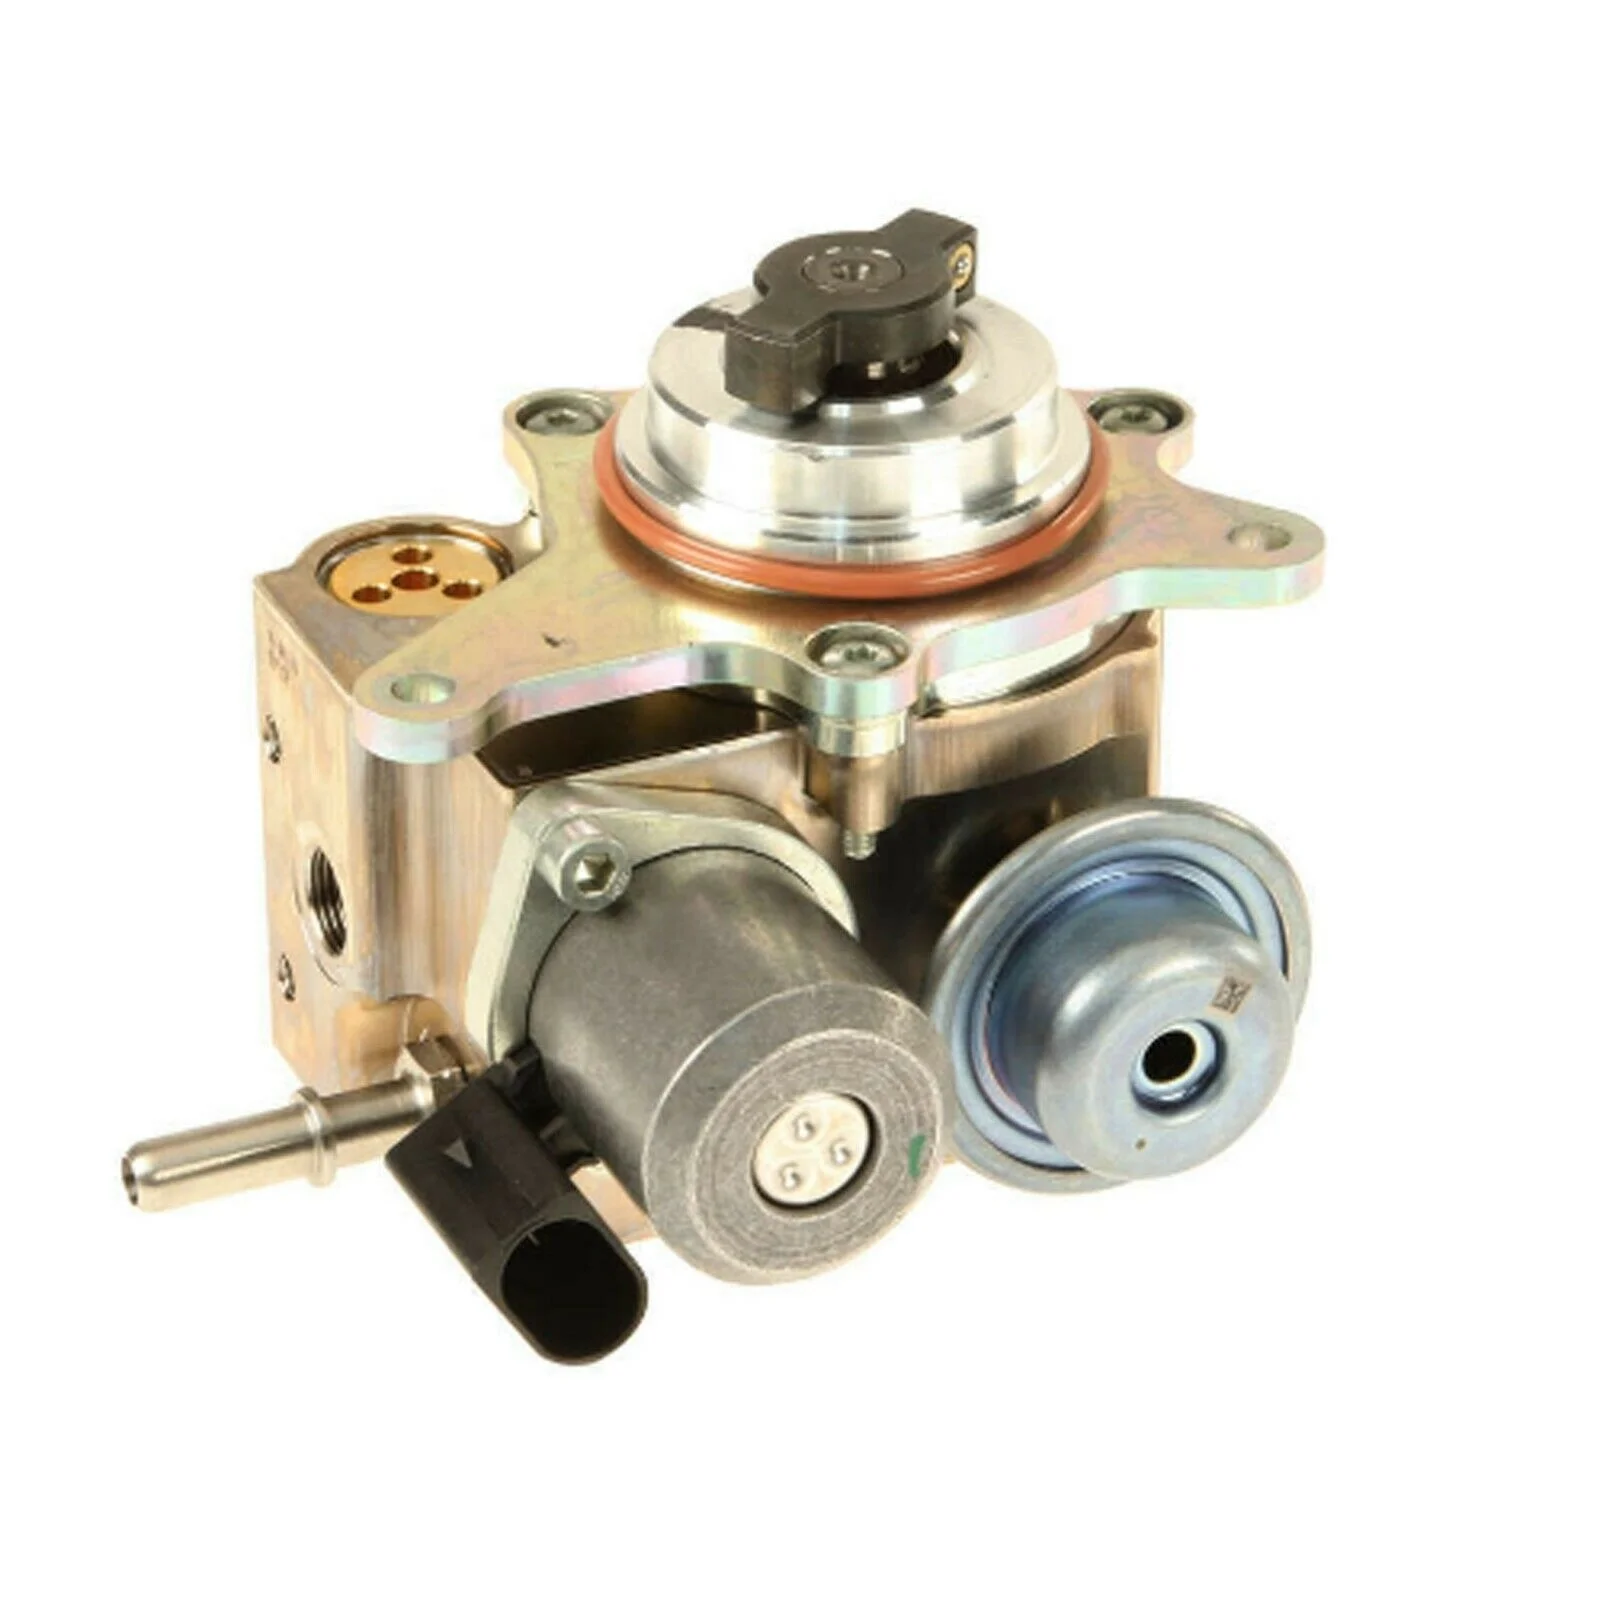 Wholesale RSTFA High Pressure Fuel Pump for BMW Mini Cooper S R55 R56 R57  R58 N14 2007-2010 13517588879 13517573436 13537528345 9819938480 From 